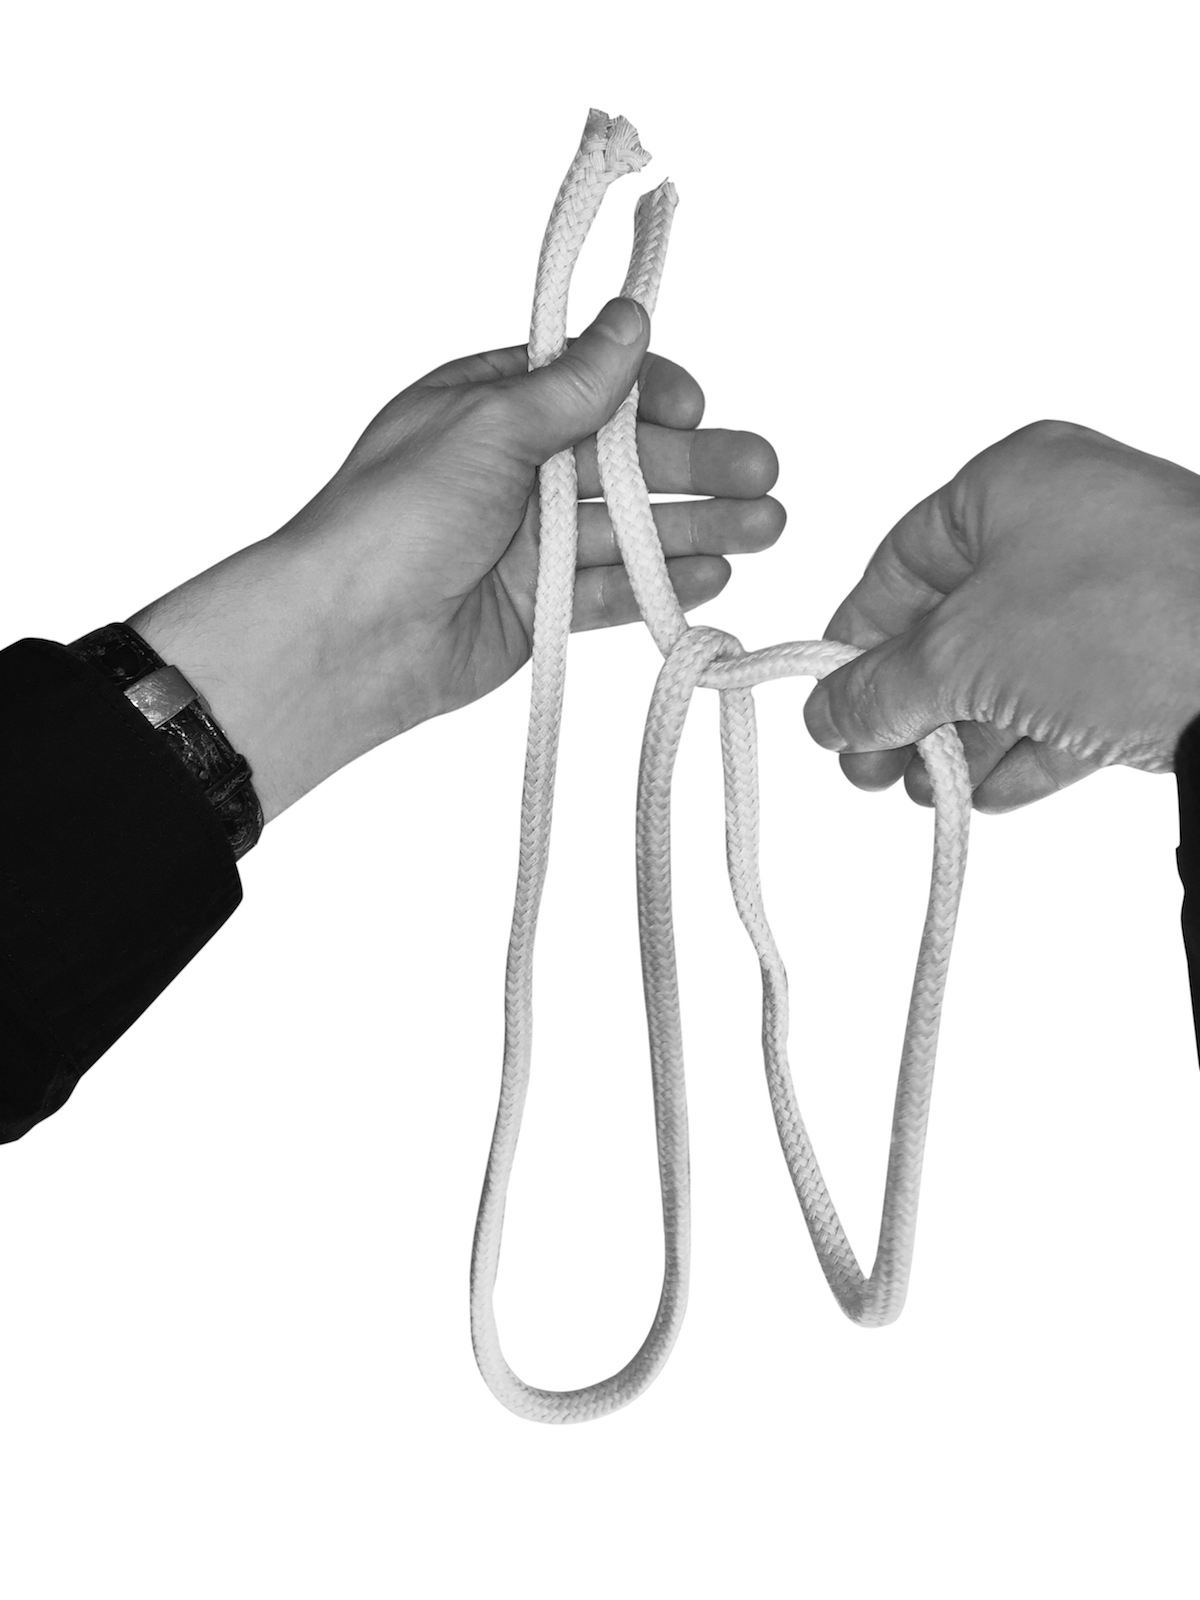 Magic 101: What Is Rope Magic? Learn How to Perform Penn